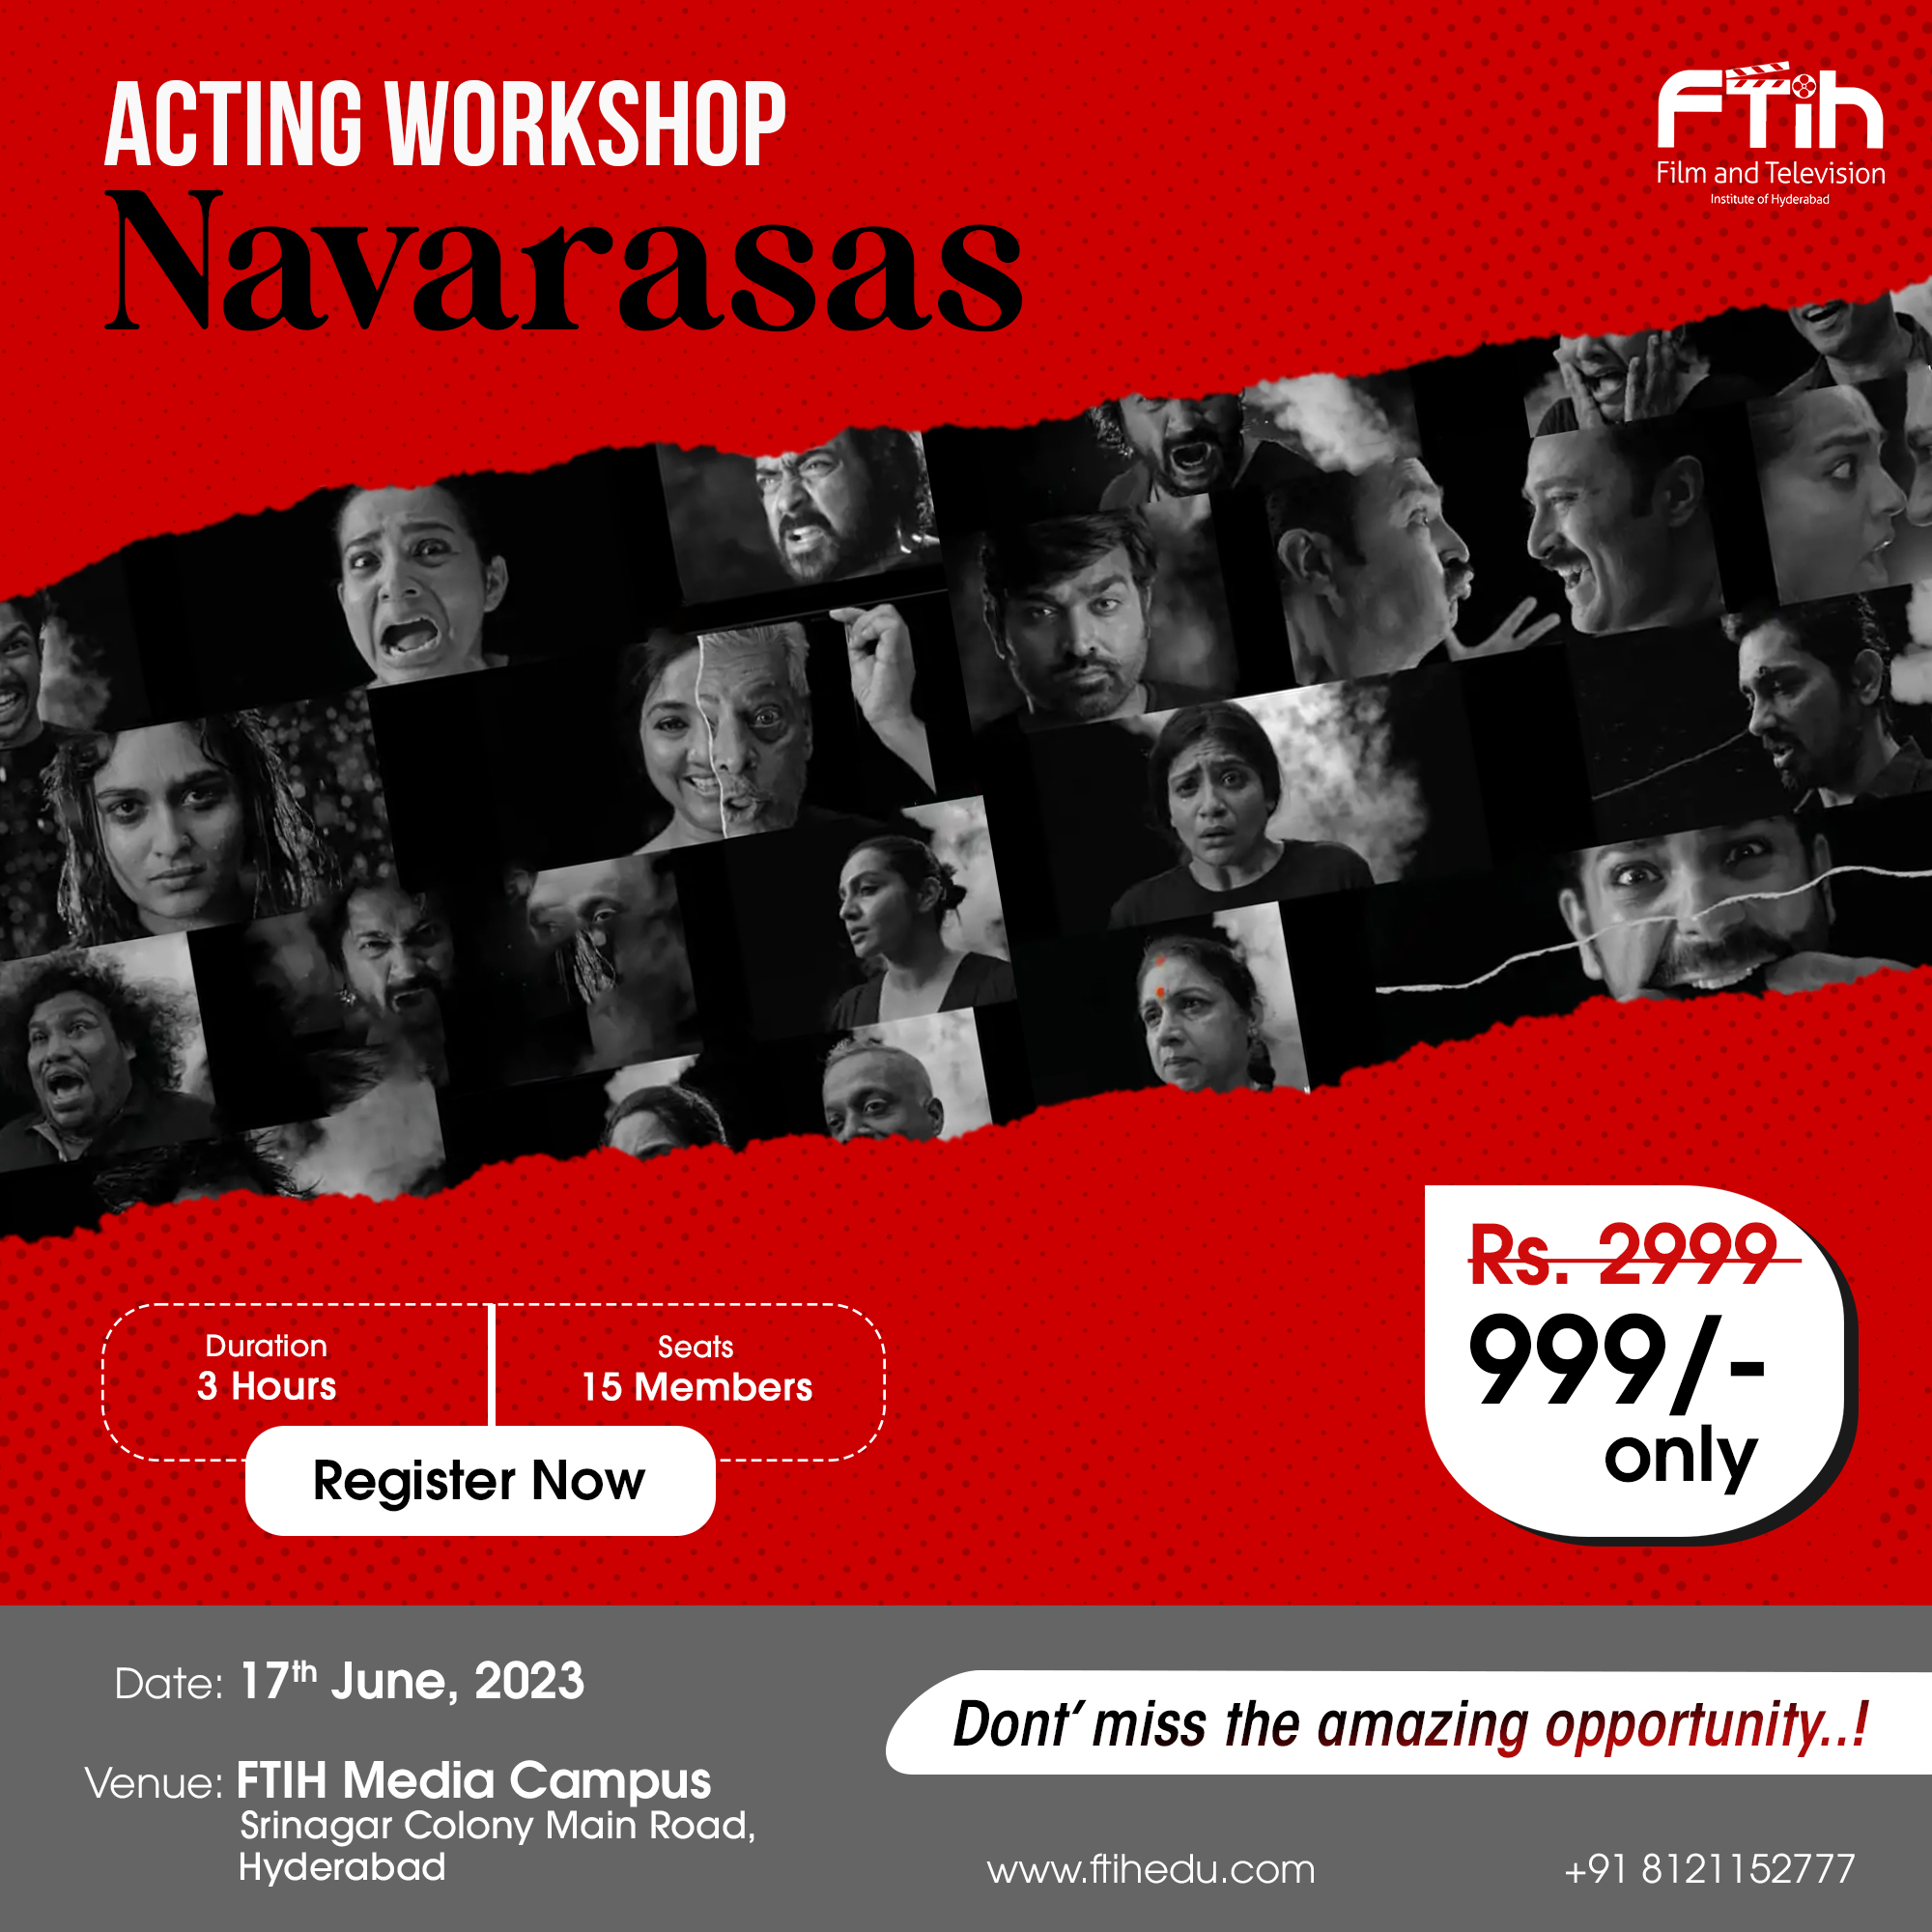 Participants engrossed in a Navarasas acting workshop, expressing a range of emotions including love, laughter, anger, courage, fear, disgust, wonder, compassion, and peace.